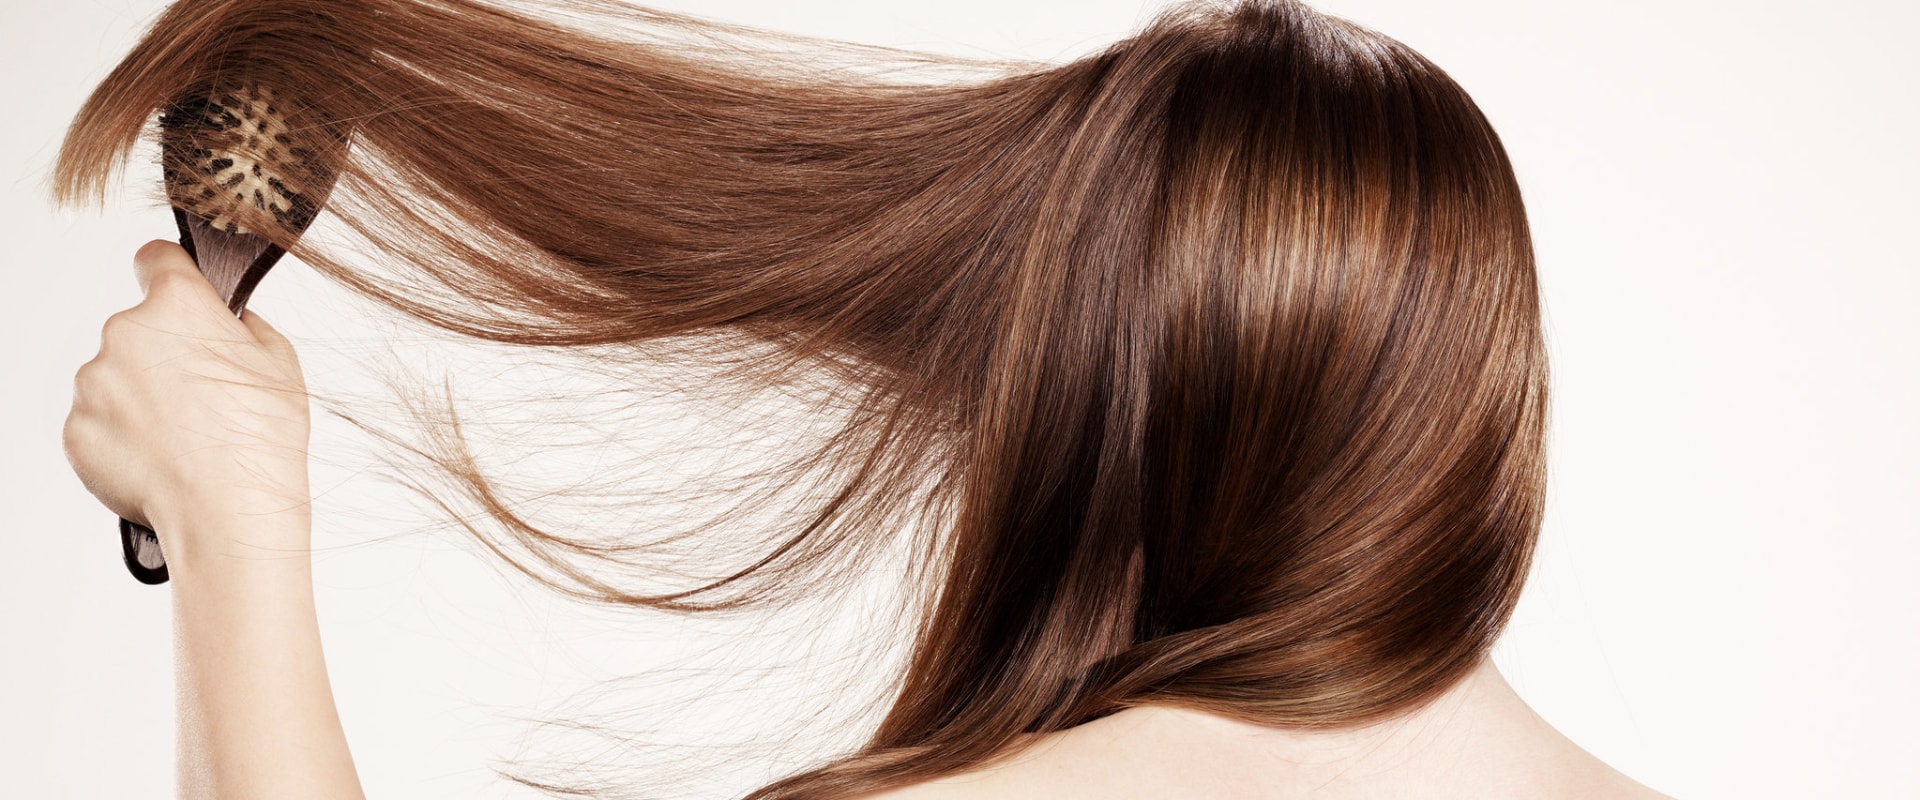 Beauty Treatments for Thinning Hair: What You Need to Know